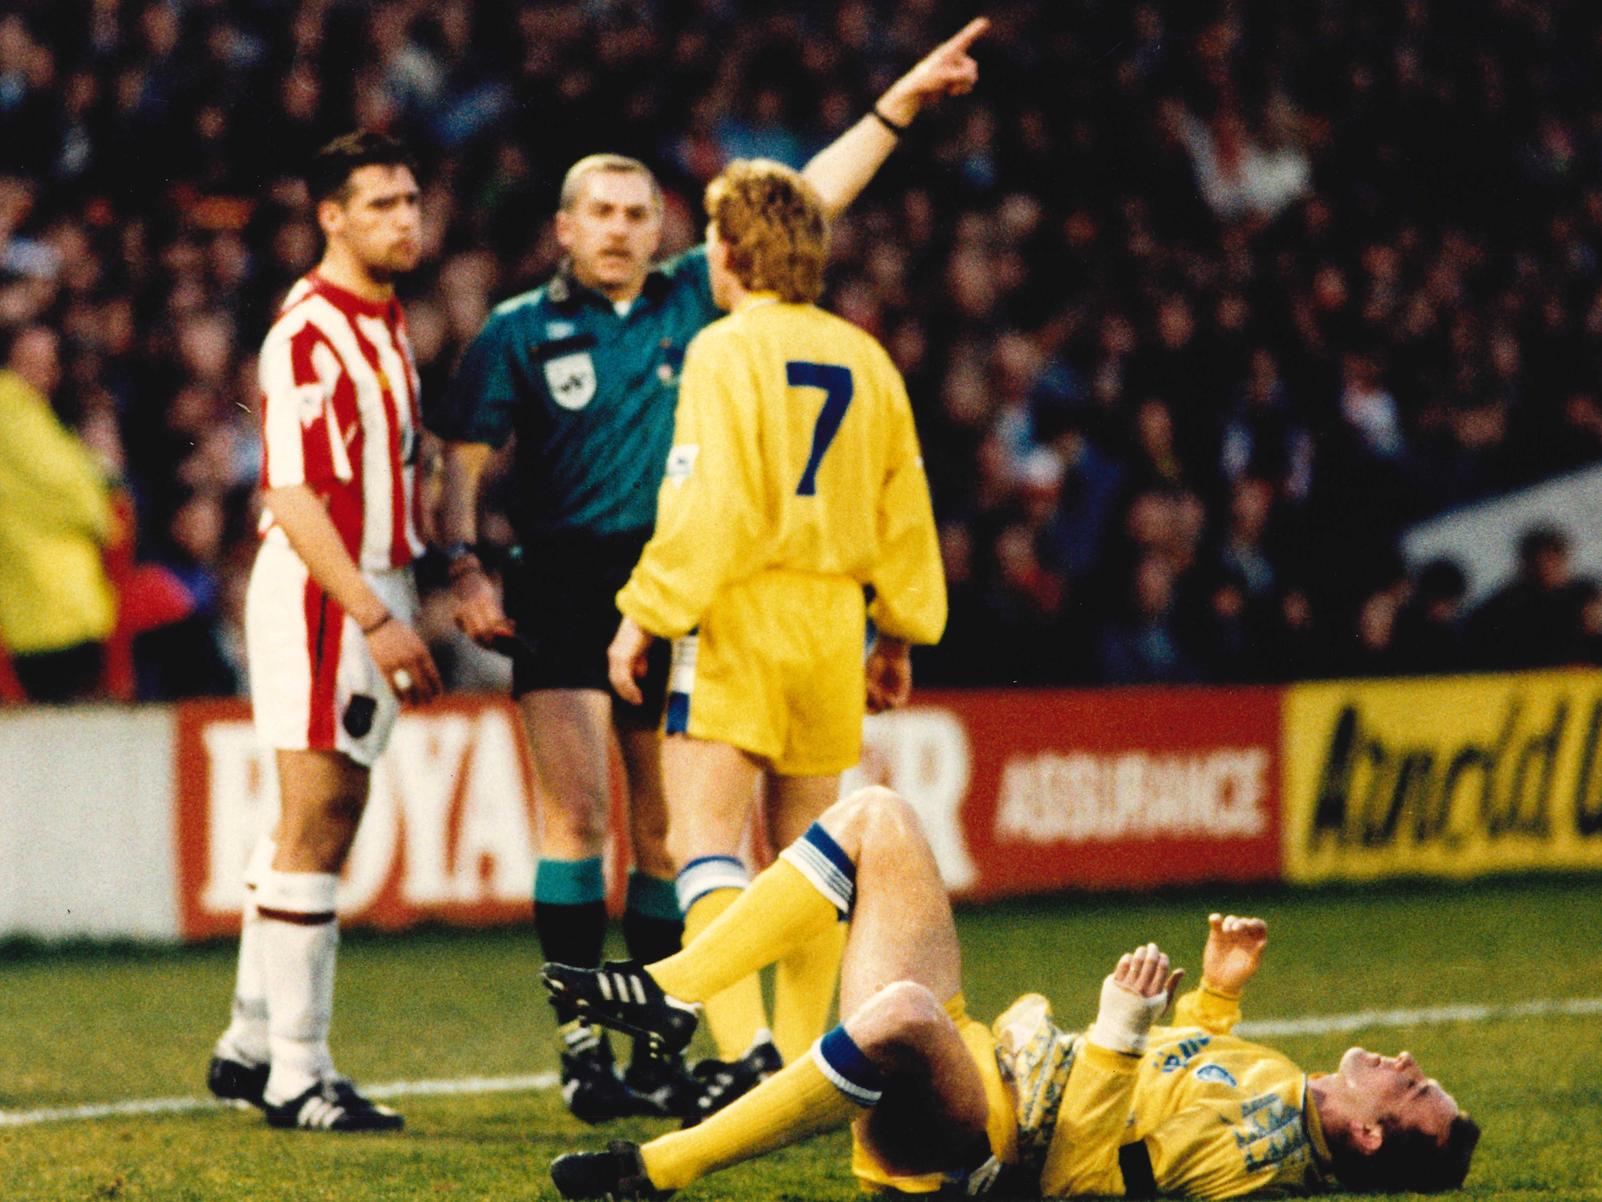 Ouch! Gordon Strachan remonstrates with the ref after seeing John Pemberton flatten Gary MacAllister.